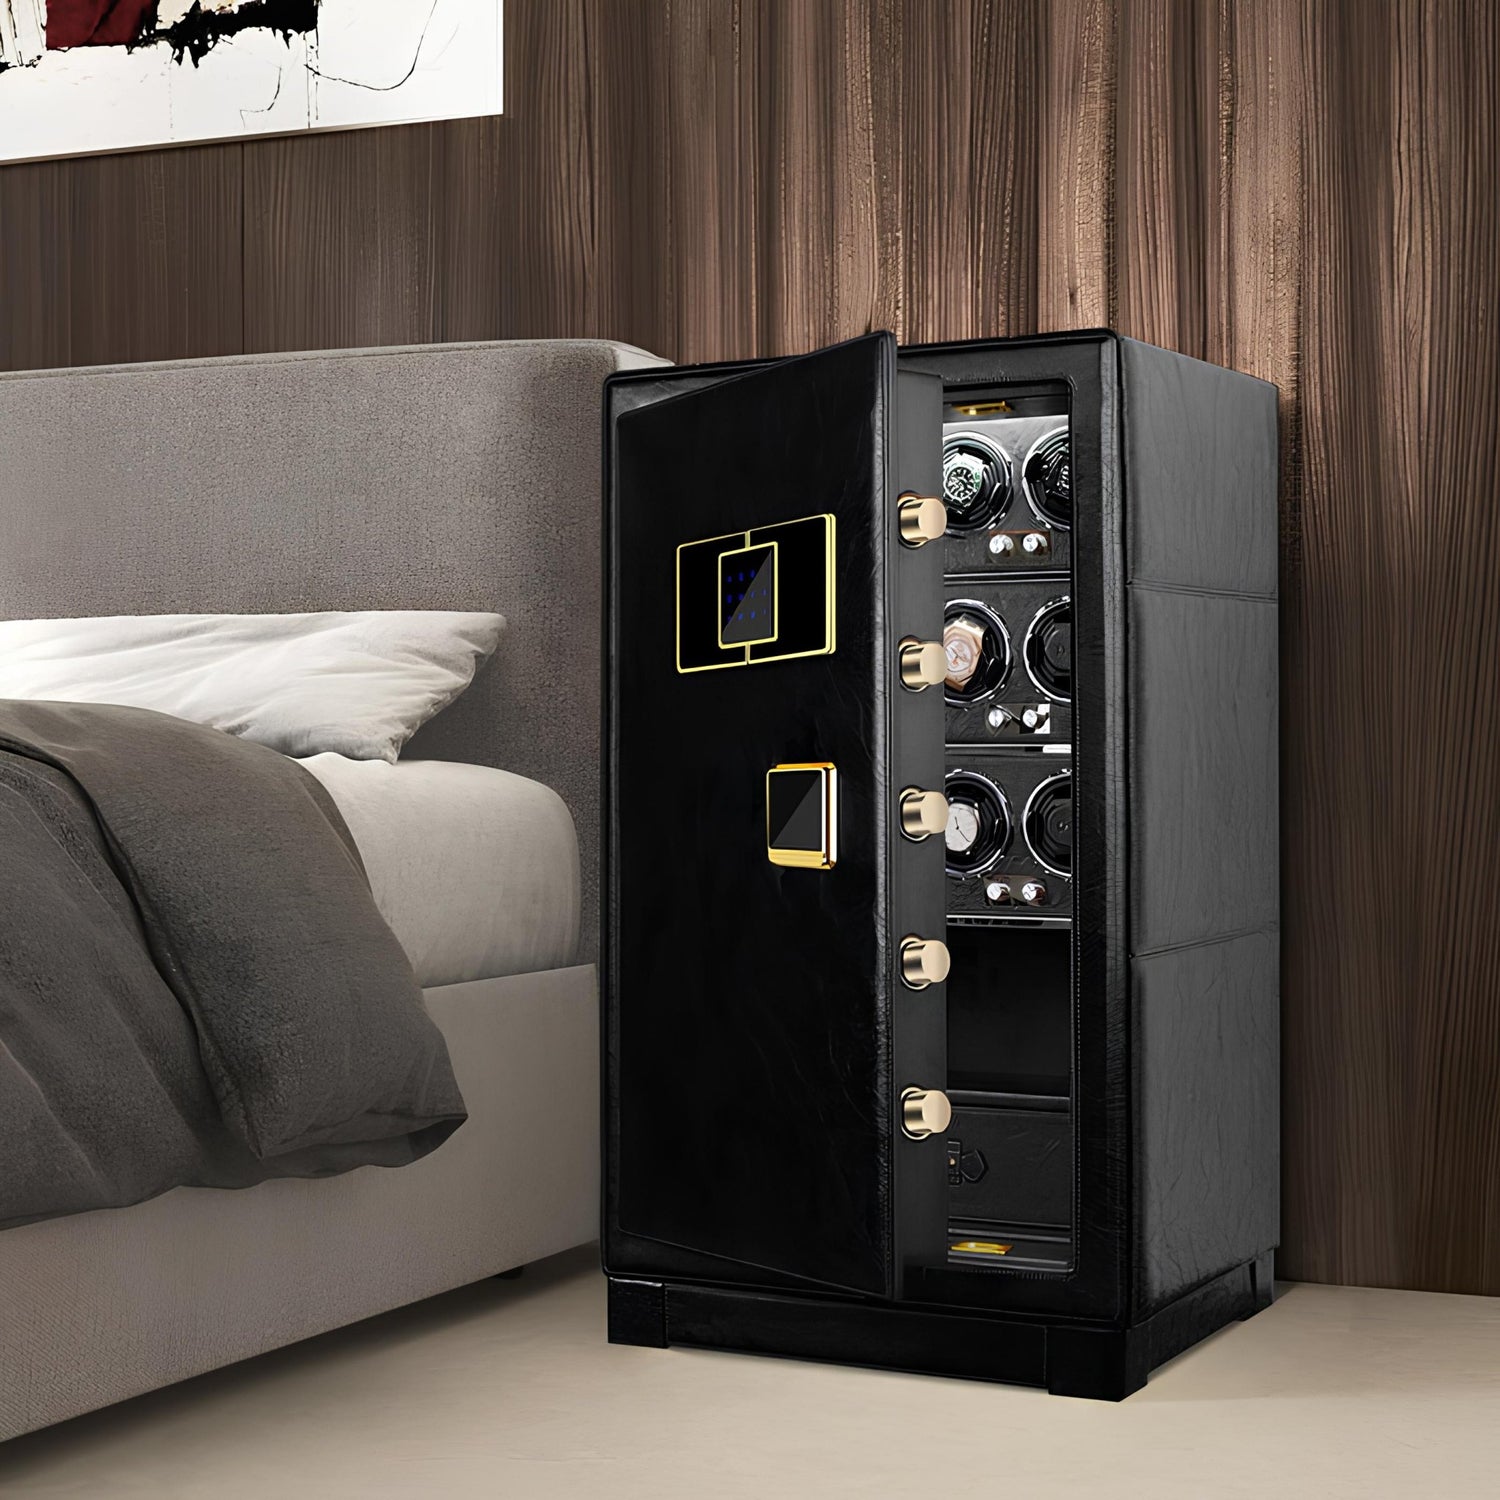 Best Watch Winder for Roger Dubuis